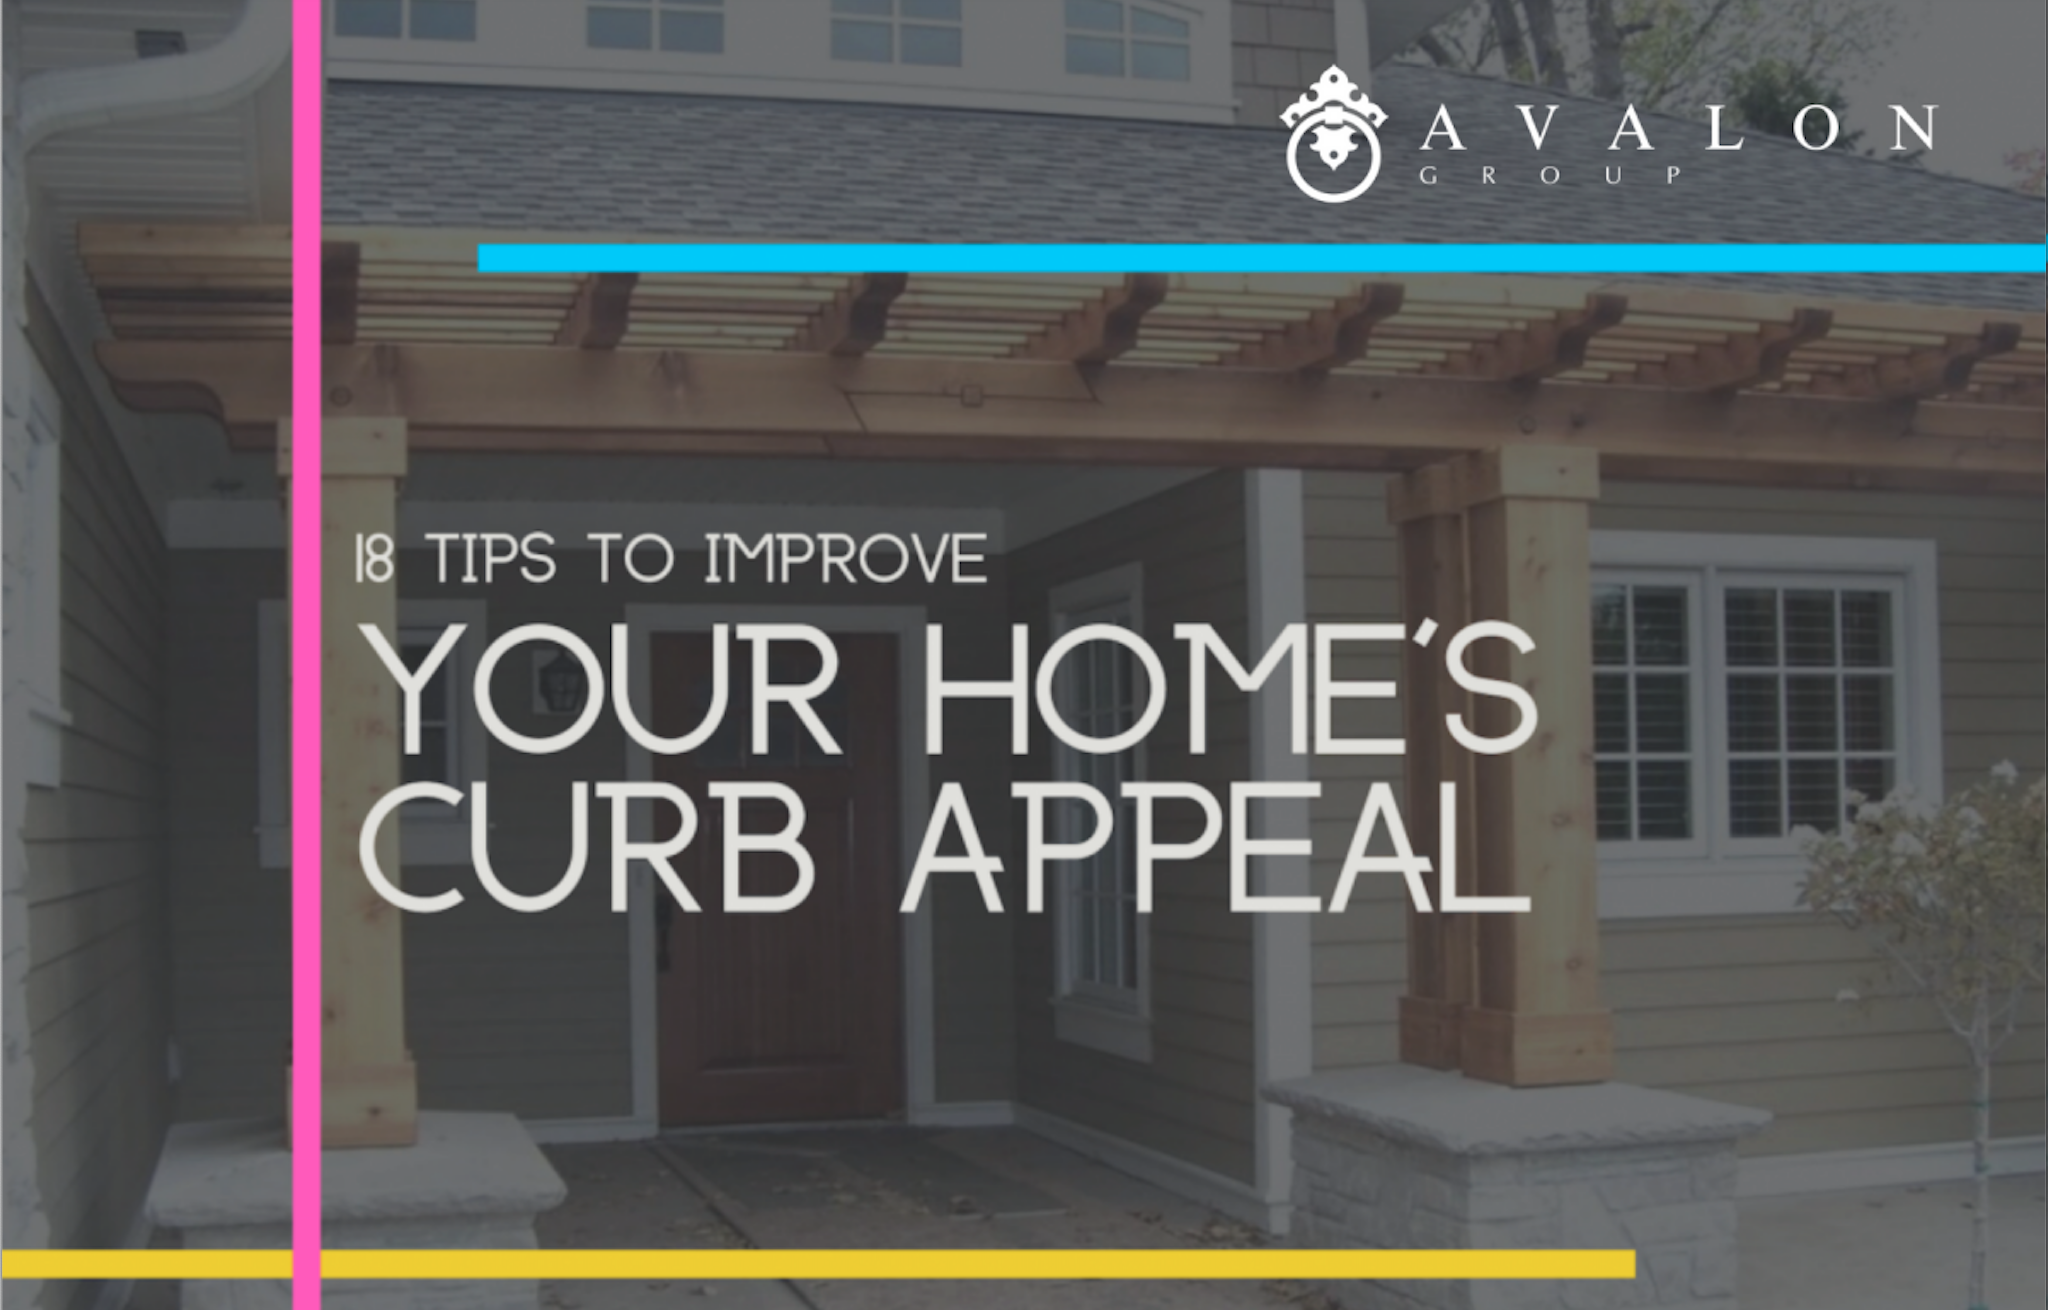 18 tips to help improve your home's curb appeal right now.